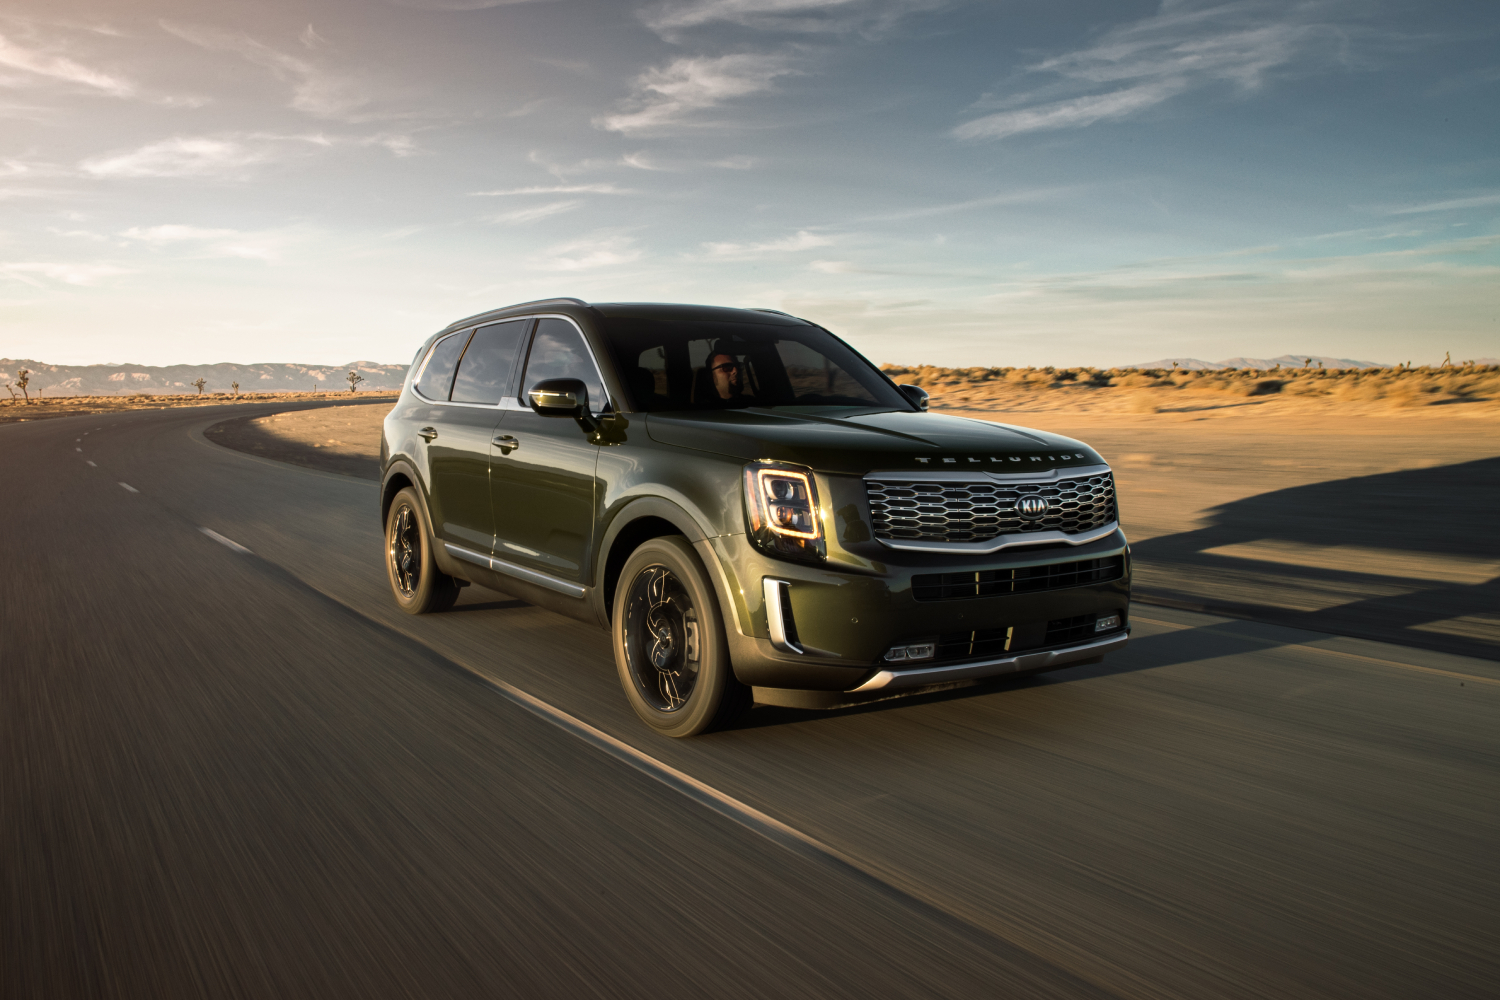 The Kia Telluride is one of the most satisfying SUVs, according to Consumer Reports